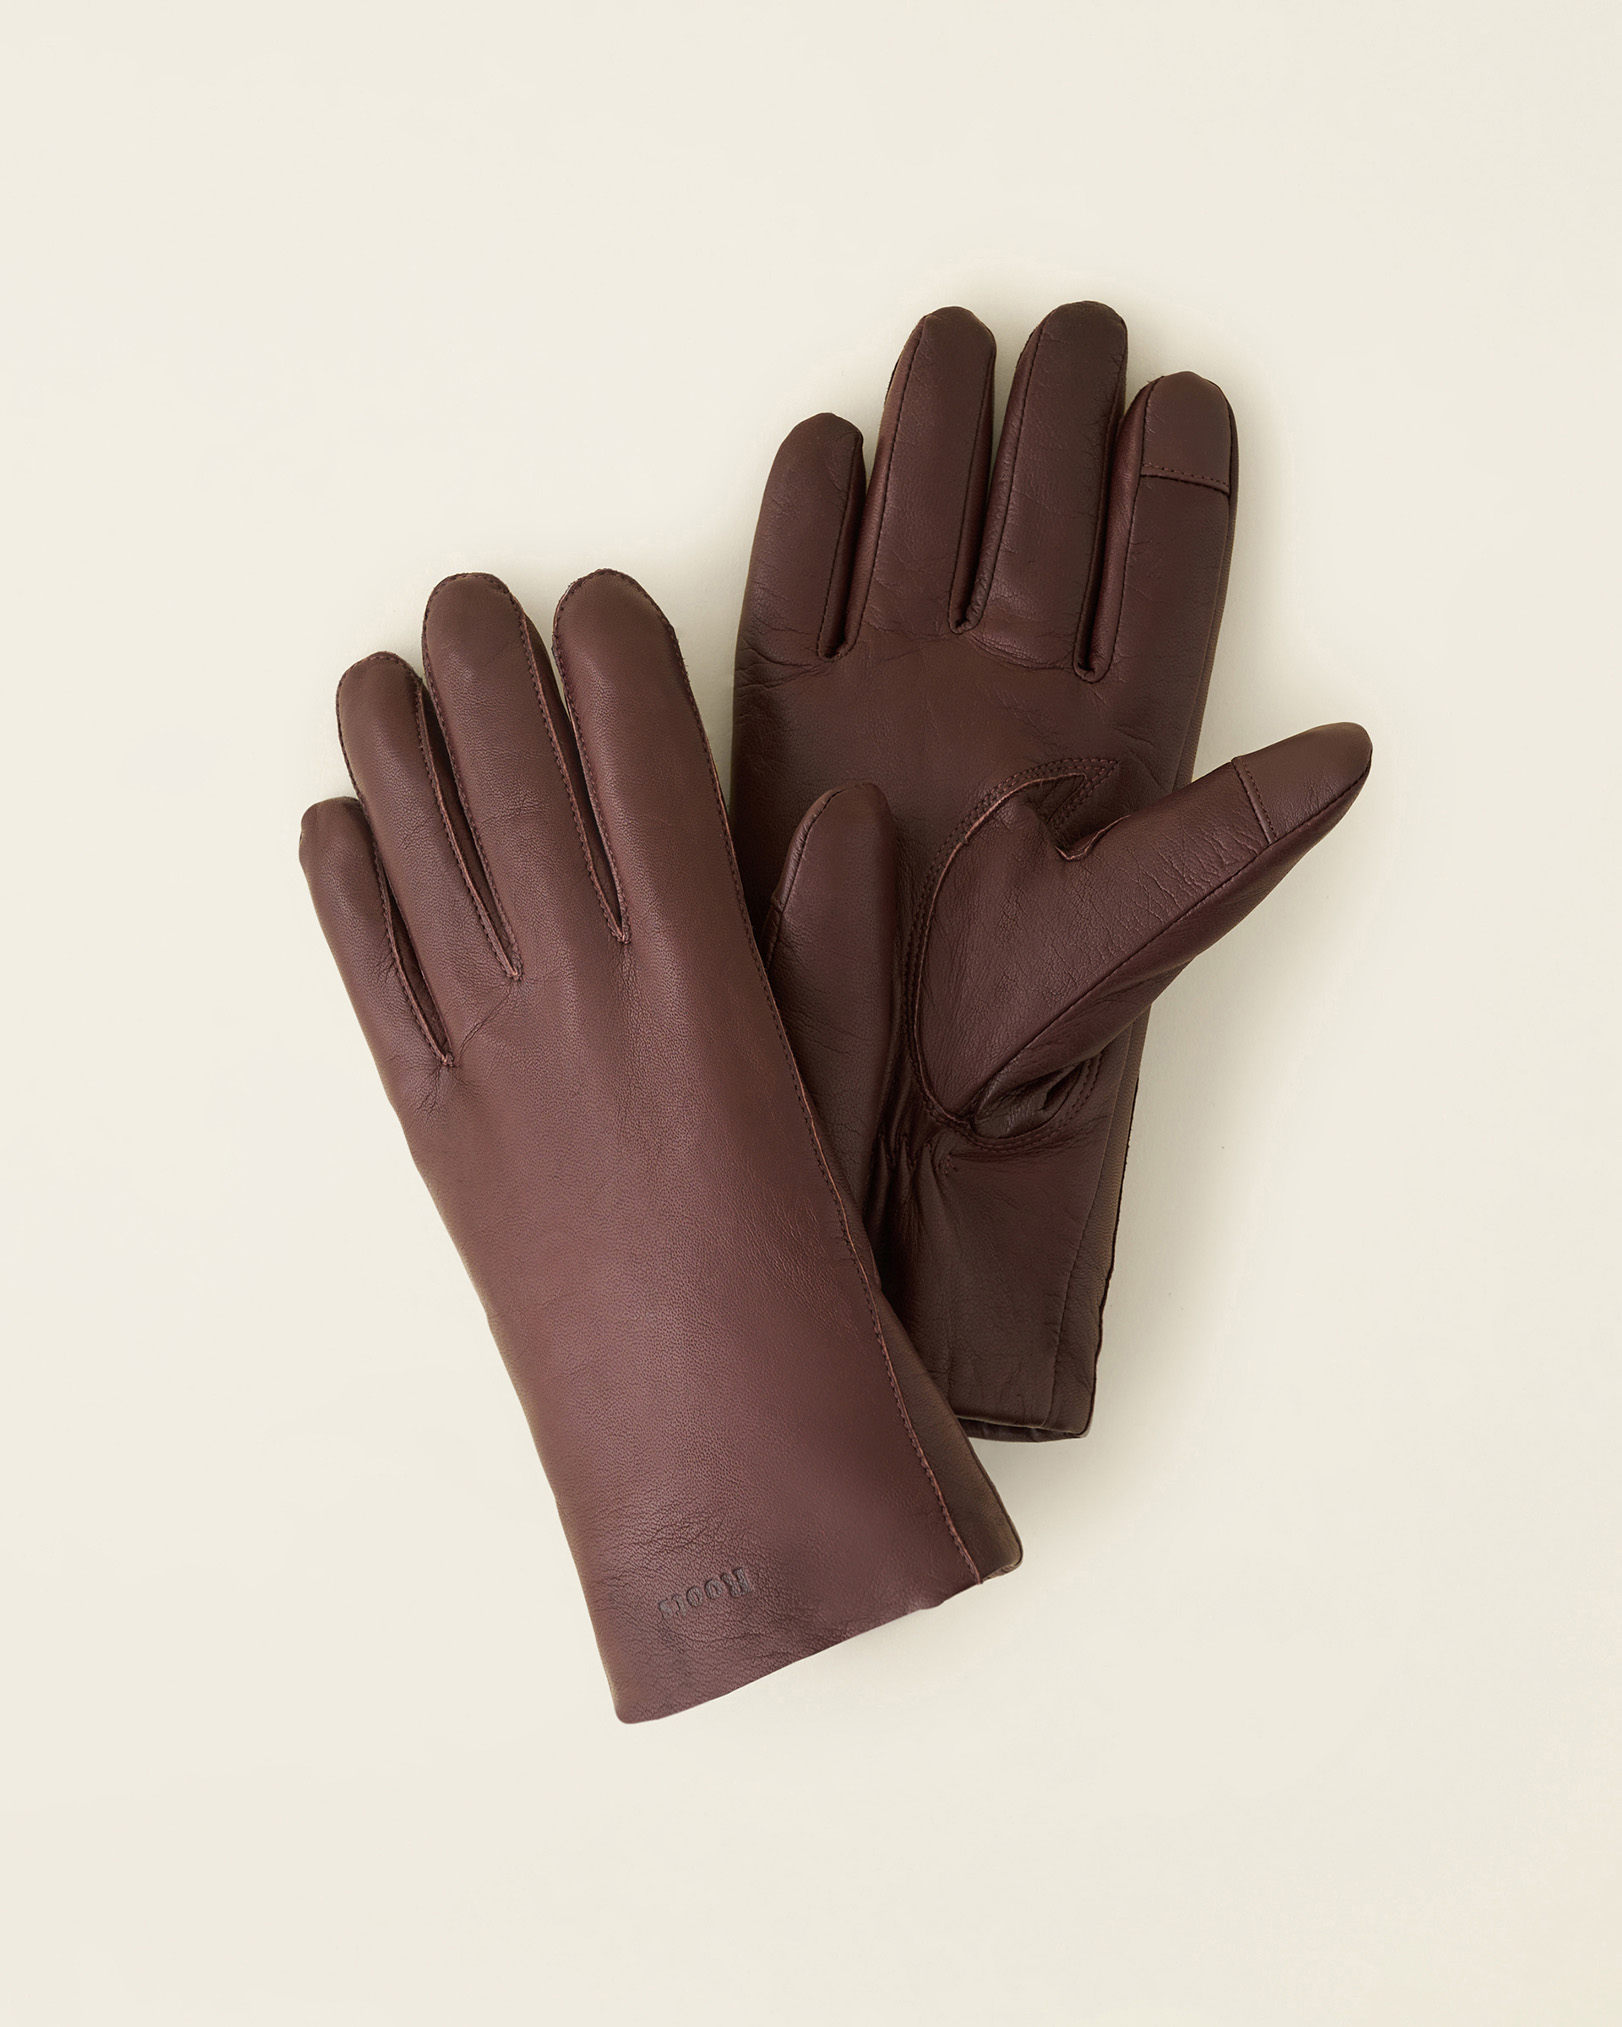 Roots Men's Touch Nappa Glove in Tan